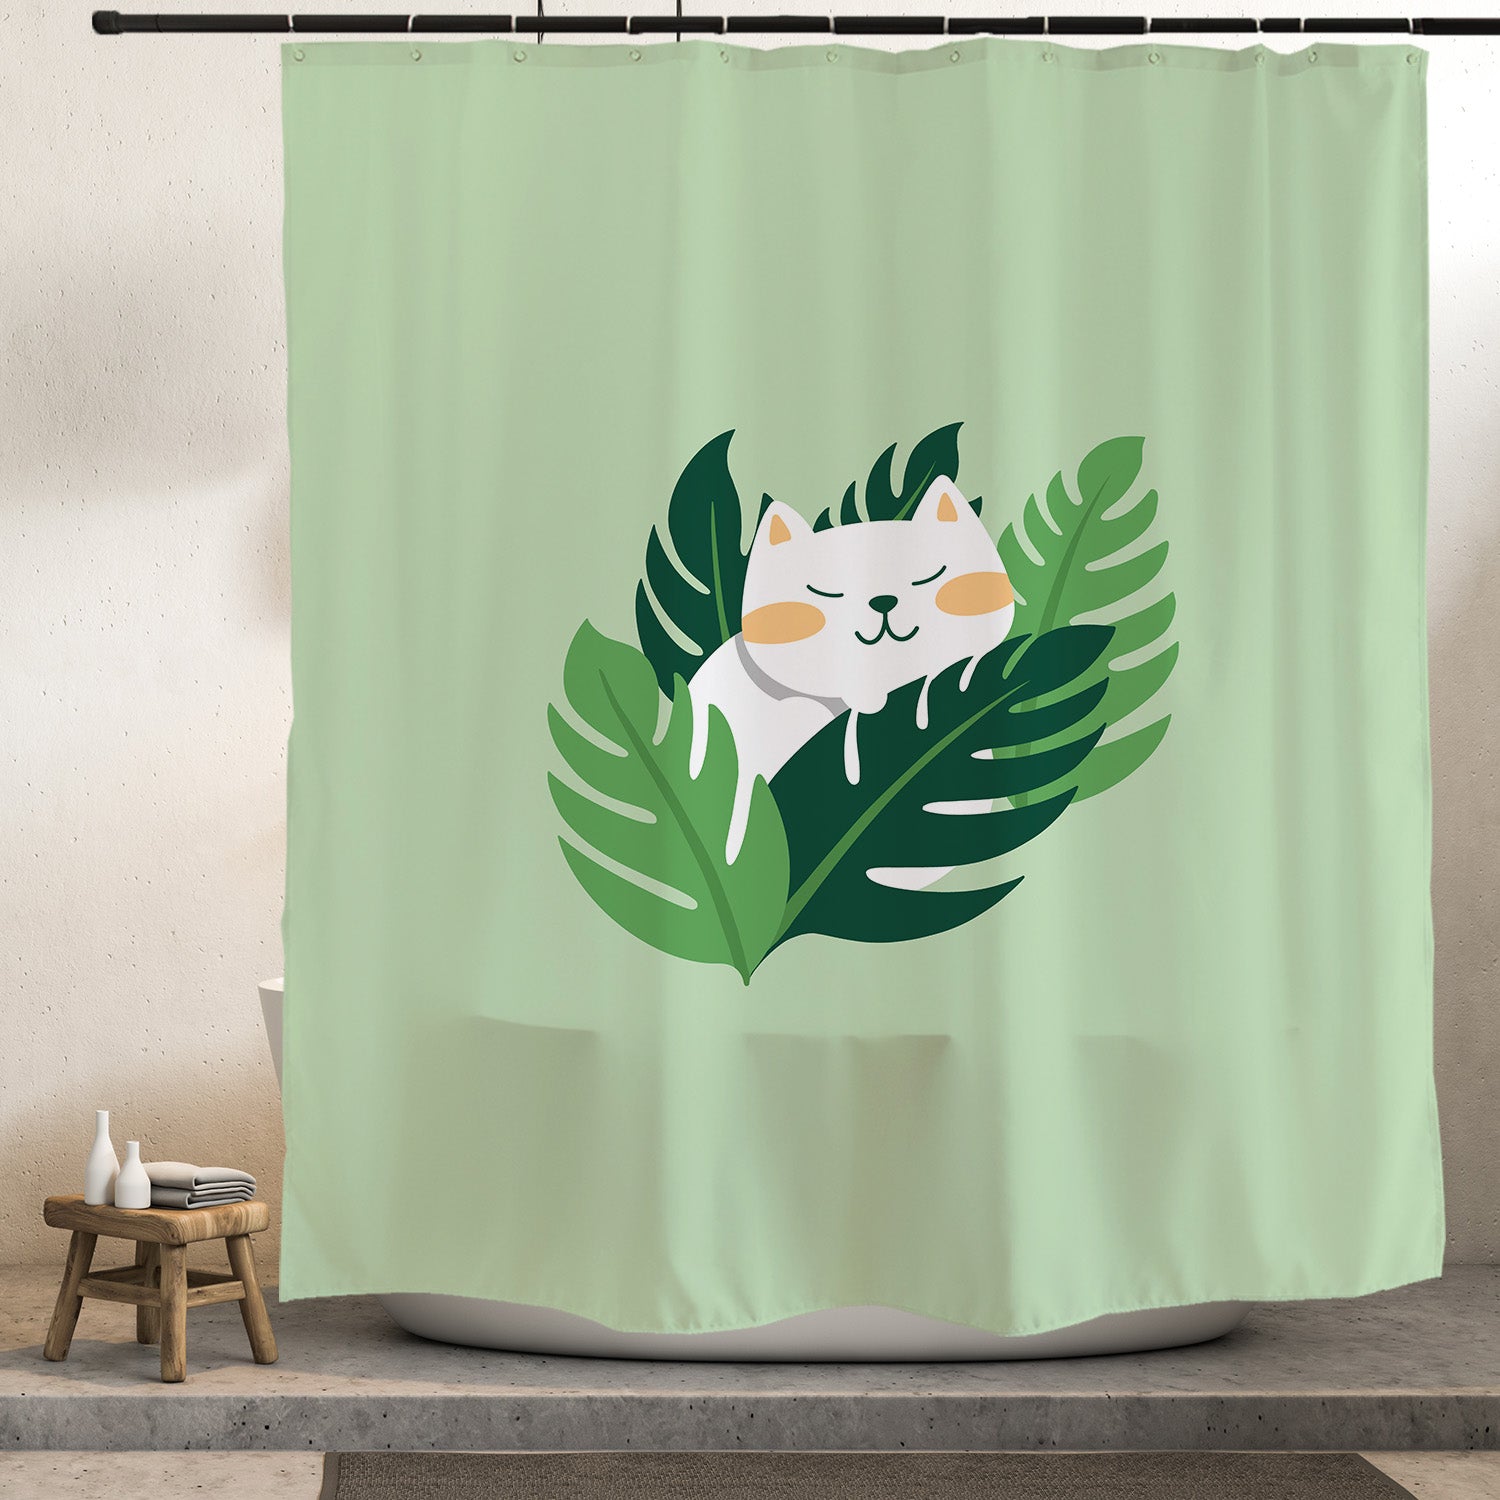 Feblilac Monstera Cat Shower Curtain with Hooks